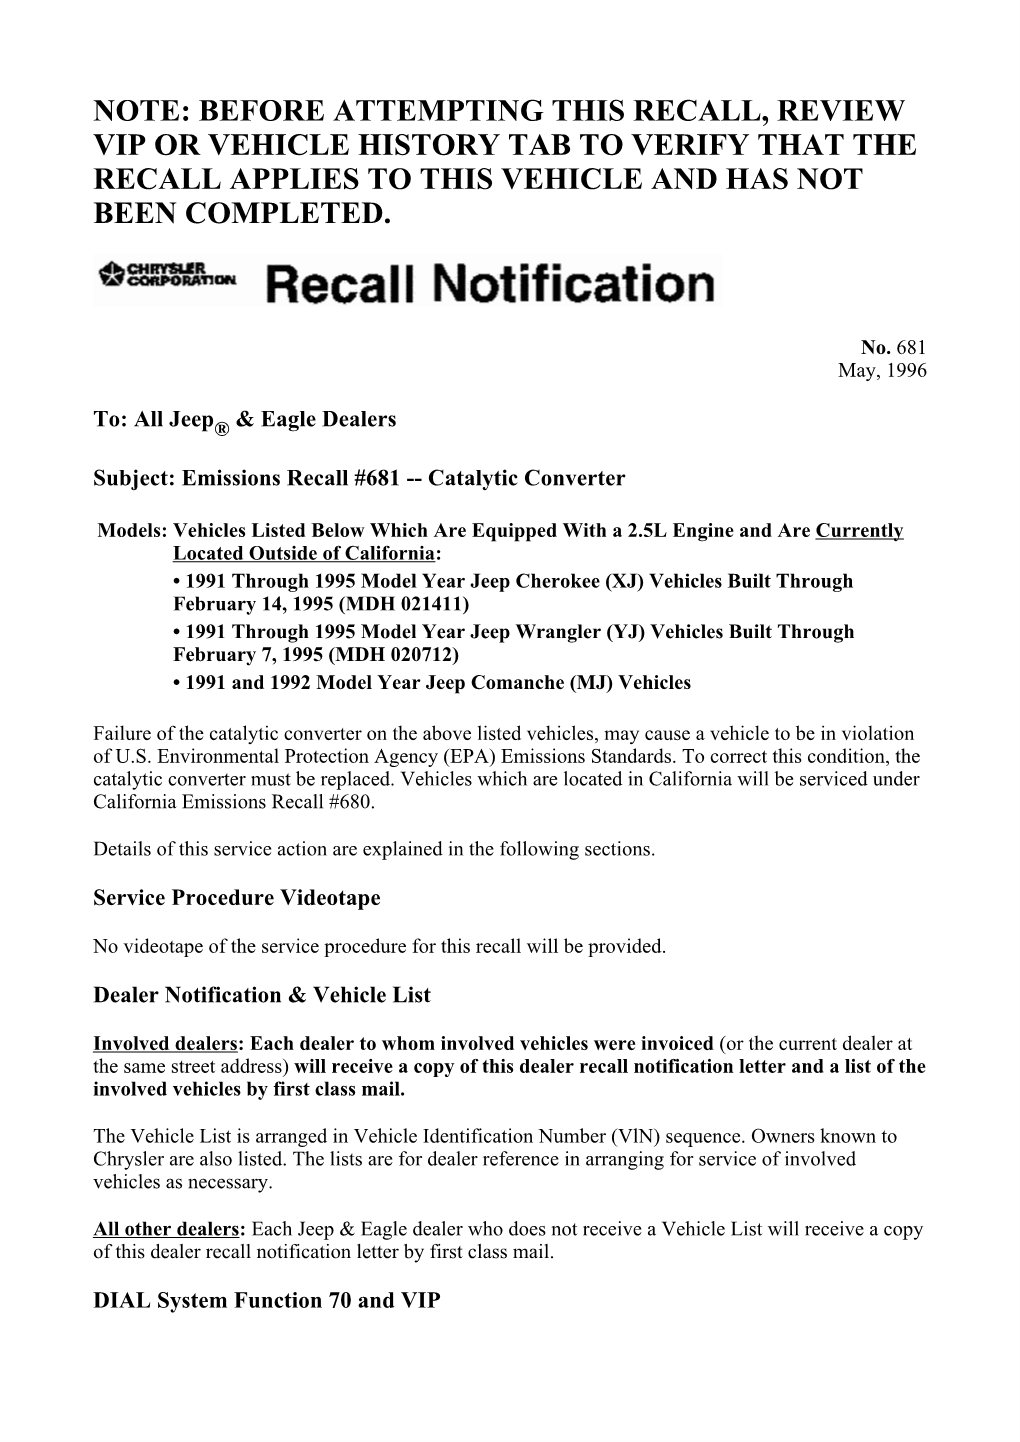 Note: Before Attempting This Recall, Review Vip Or Vehicle History Tab to Verify That the Recall Applies to This Vehicle and Has Not Been Completed